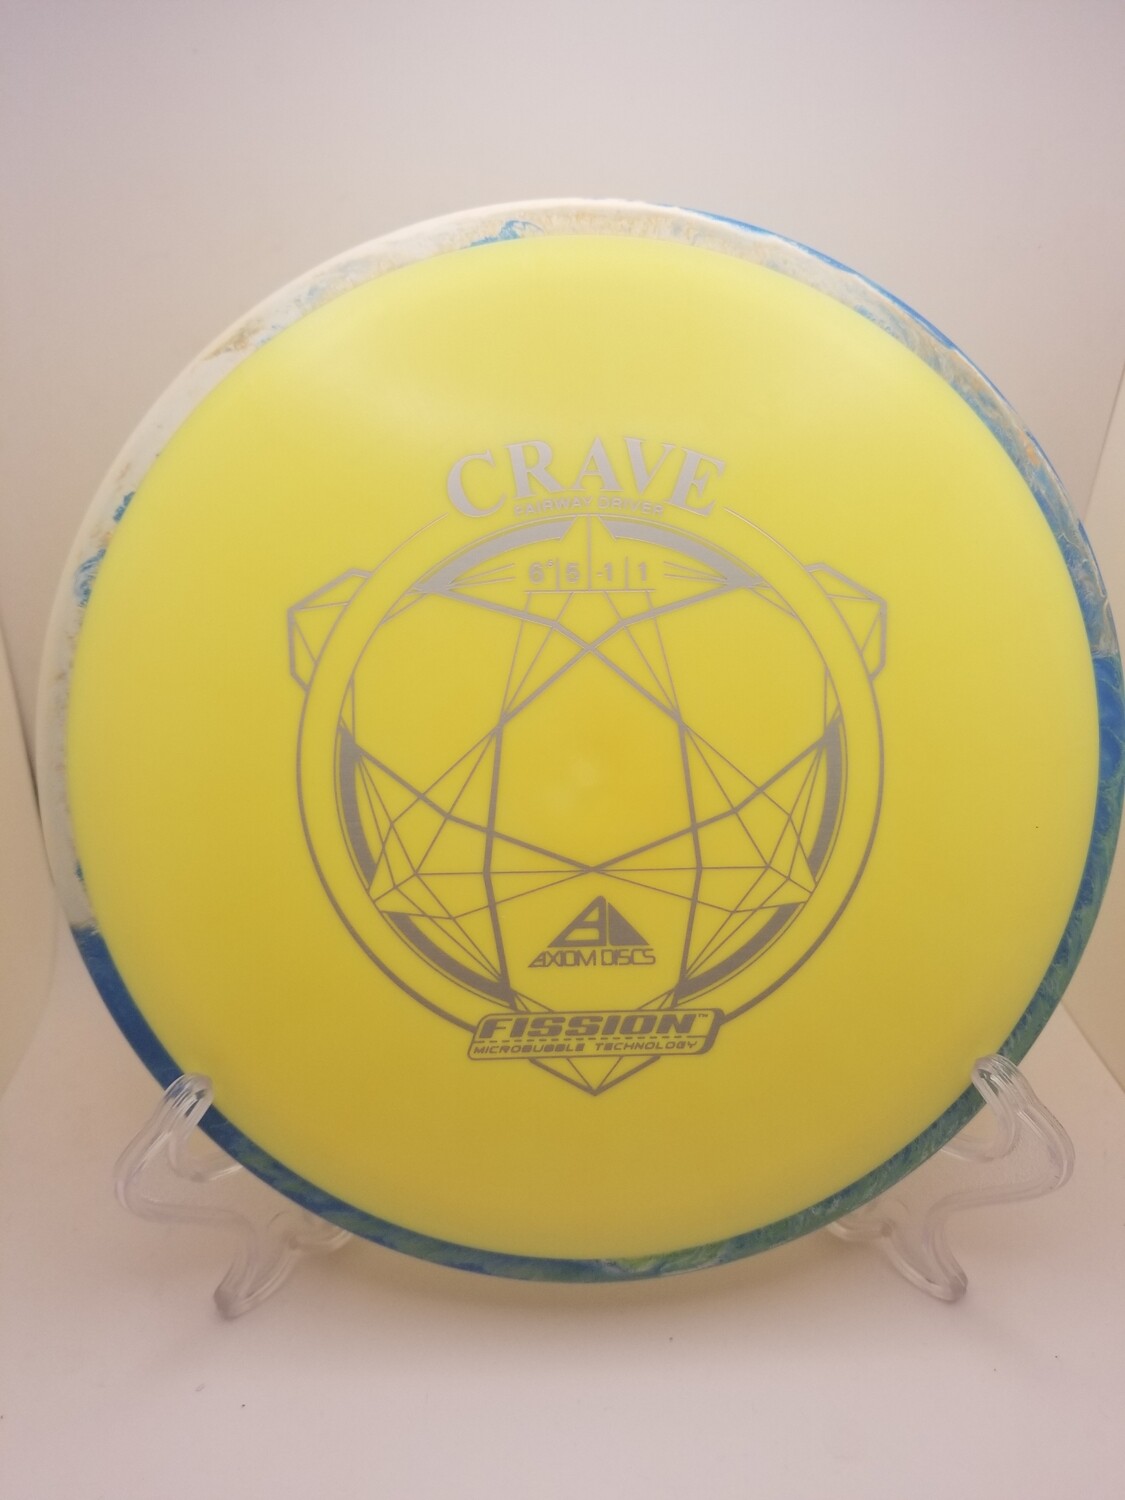 Axiom Discs Crave Yellow with Blue/white rainbow swirl Rim Fission Stamped 174g